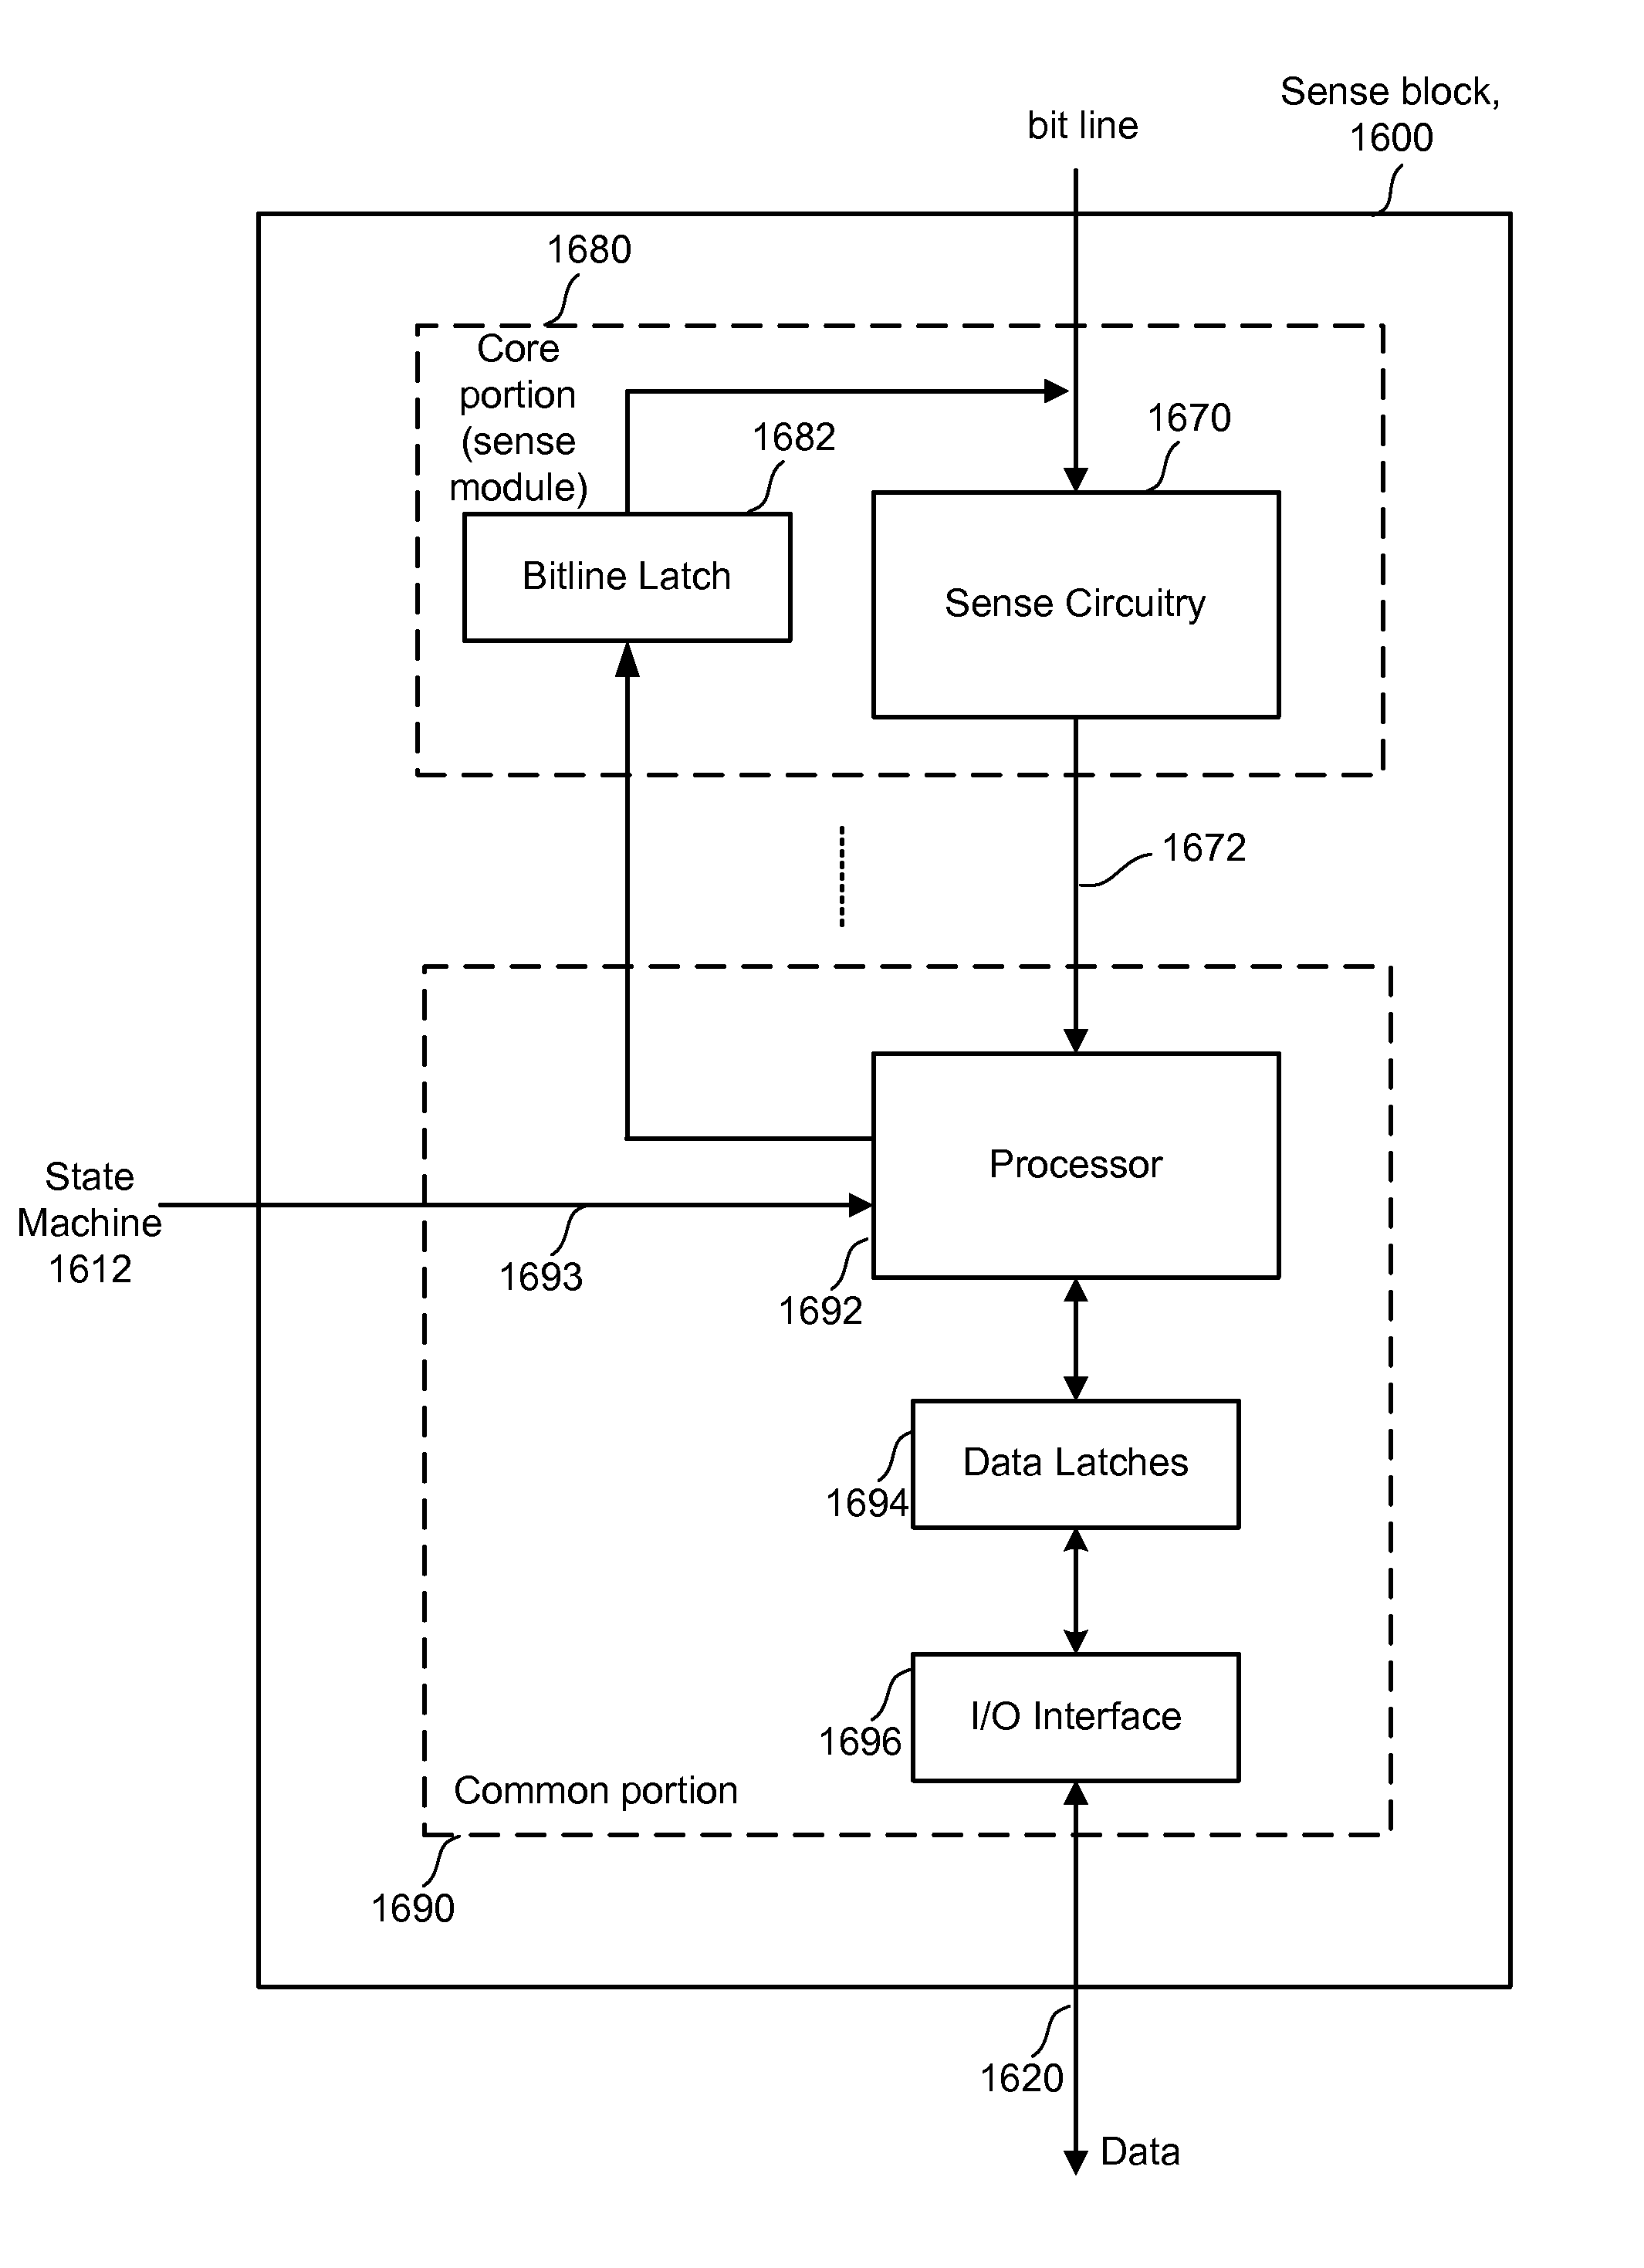 Method for decoding data in non-volatile storage using reliability metrics based on multiple reads